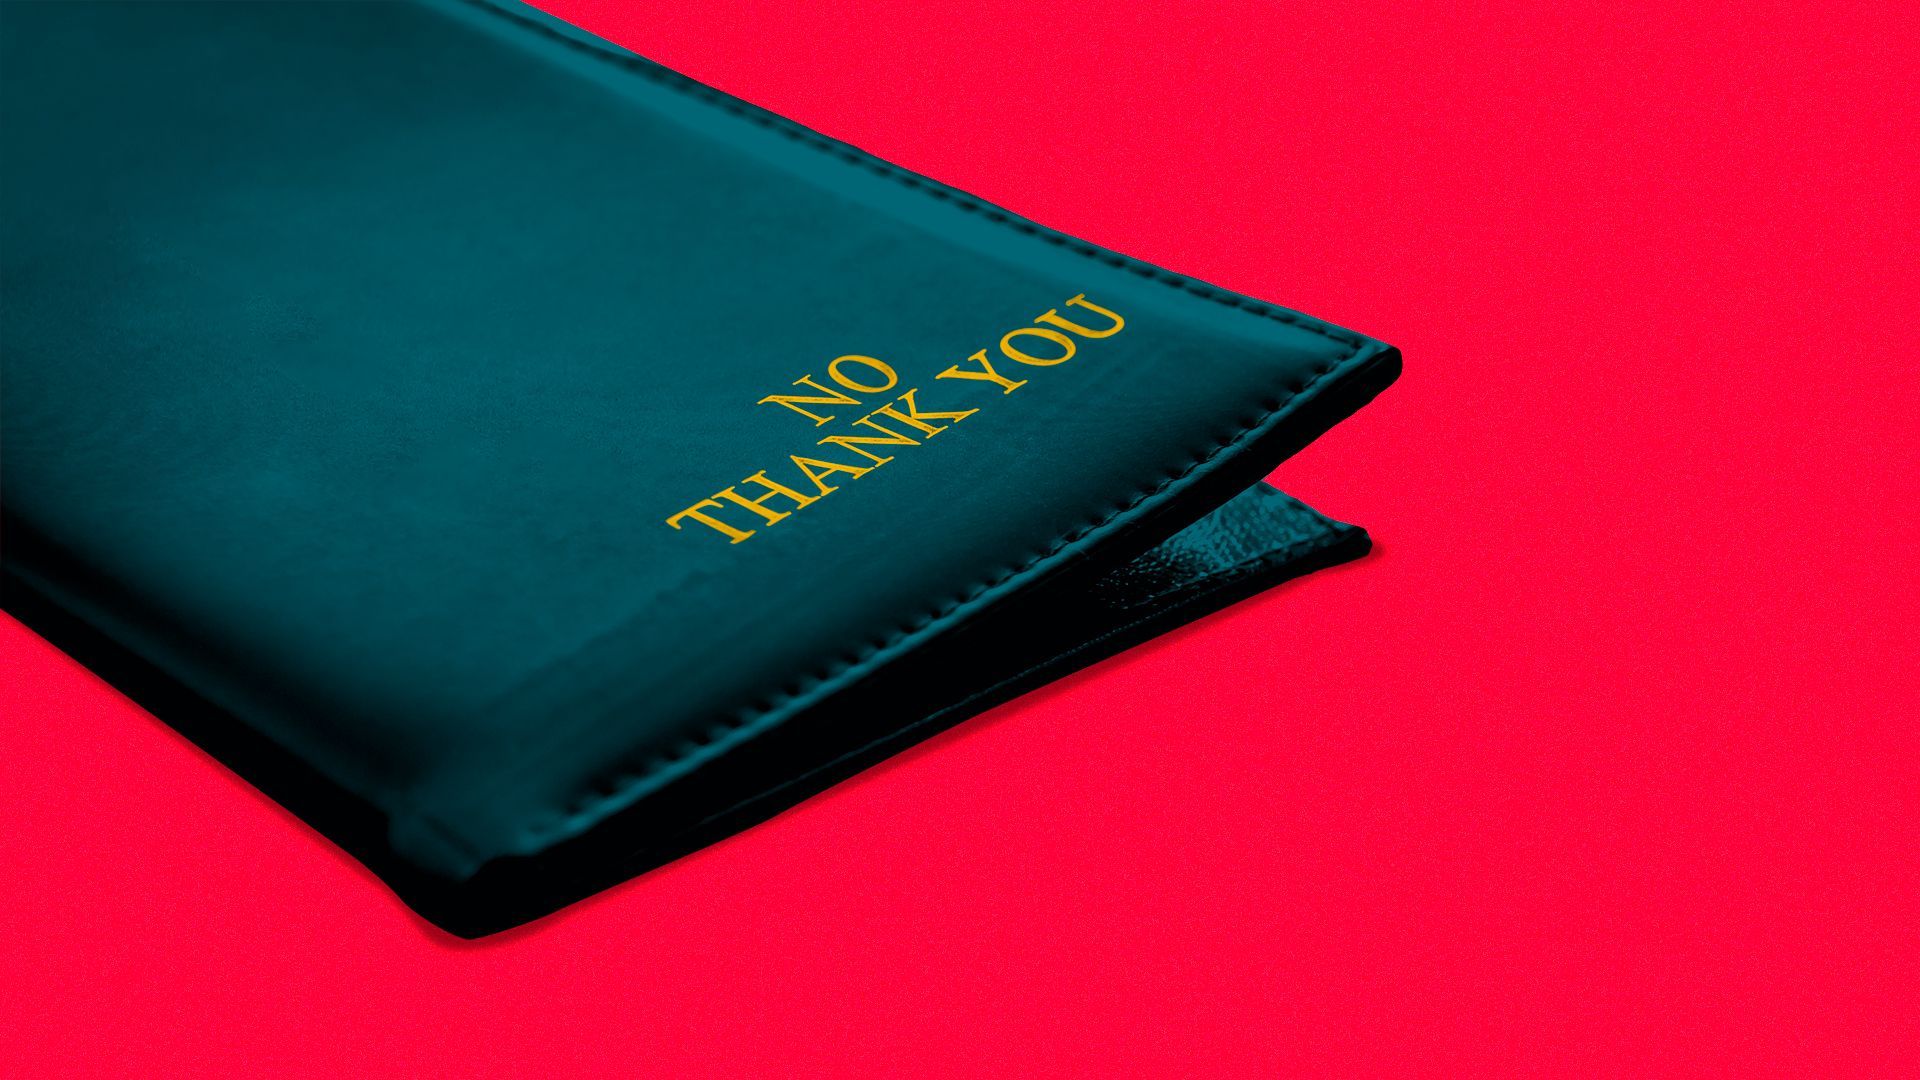 Illustration of a restaurant bill holder with the words "no thank you" on it.